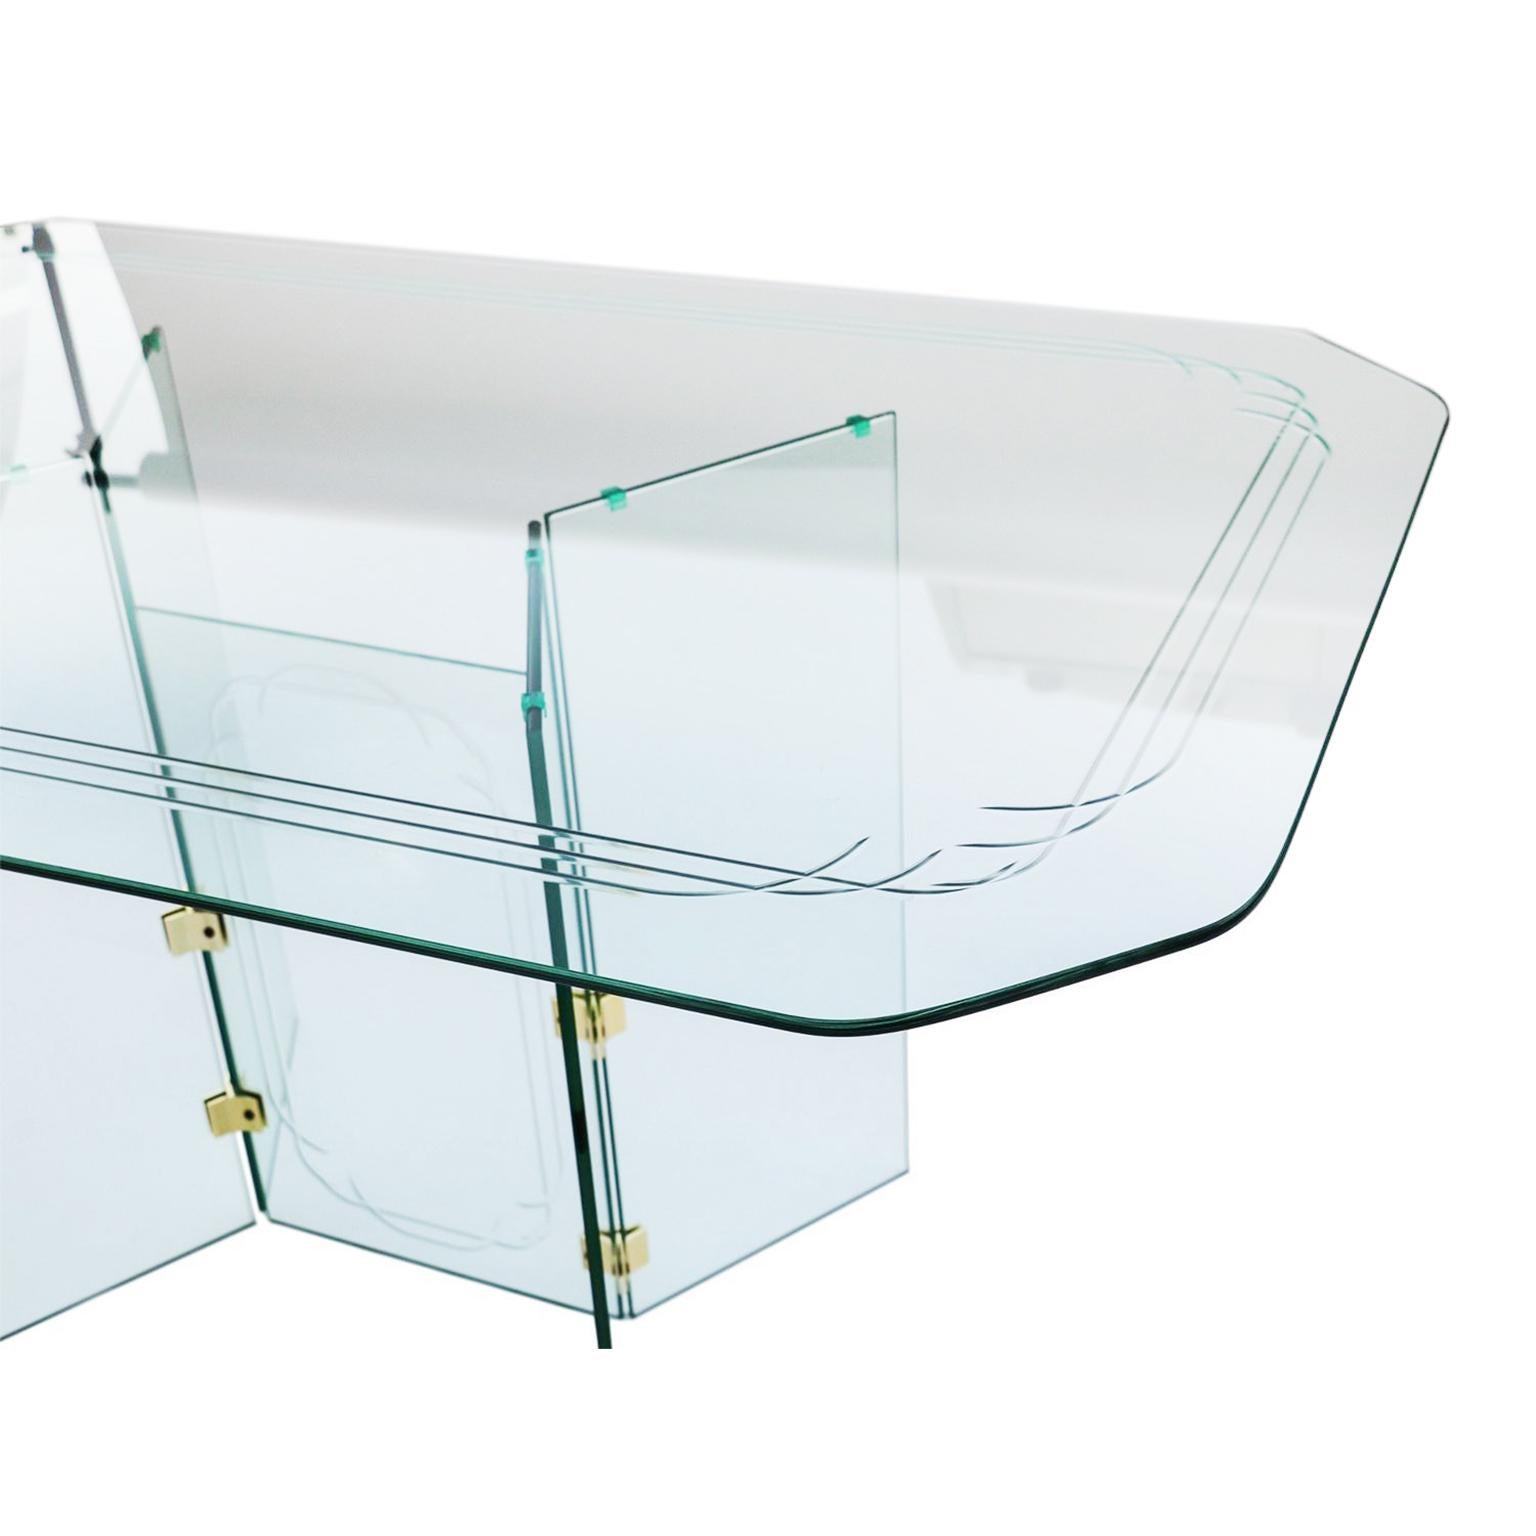 This 1960s glass table in the style of Pace collection. A substantial table that is suitable for many styles of interiors. The rounded rectangular glass top incised with three overlapping rounded rectangular lines, raised on two pairs of thick glass